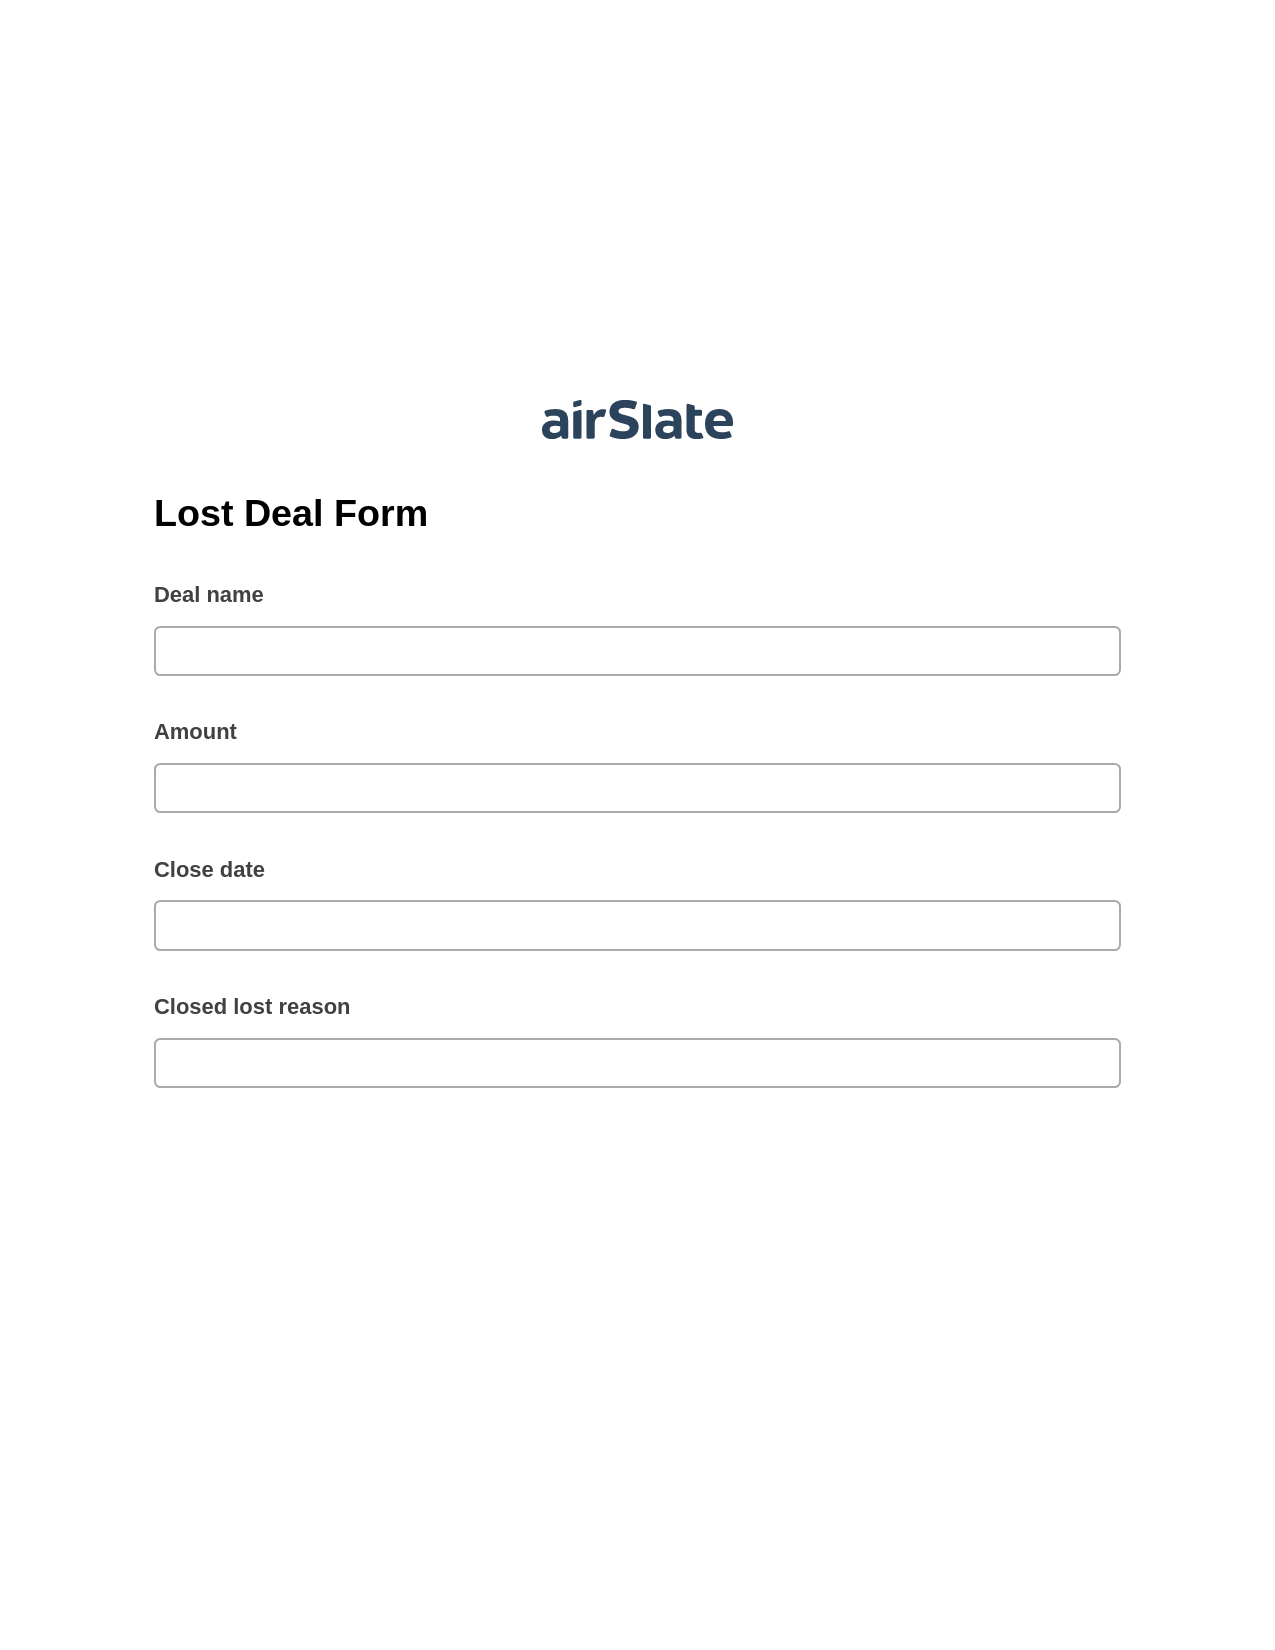 Multirole Lost Deal Form Pre-fill Dropdowns from Airtable, SendGrid send Campaign bot, Export to Google Sheet Bot